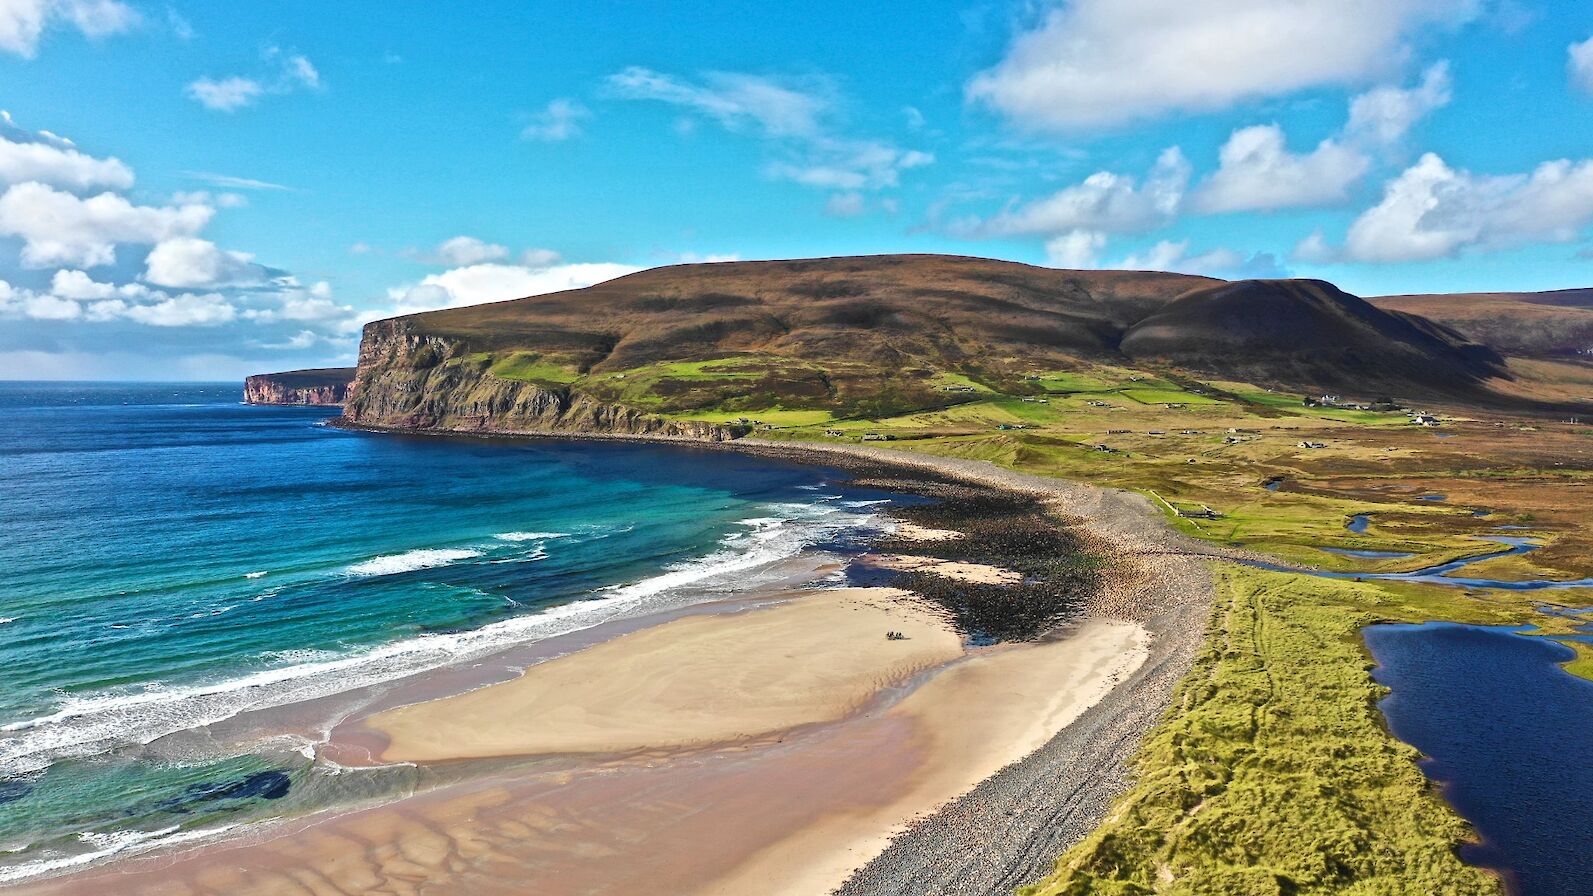 Is is because you can visit locations like Rackwick in Hoy, and be the only person on a beautiful beach?